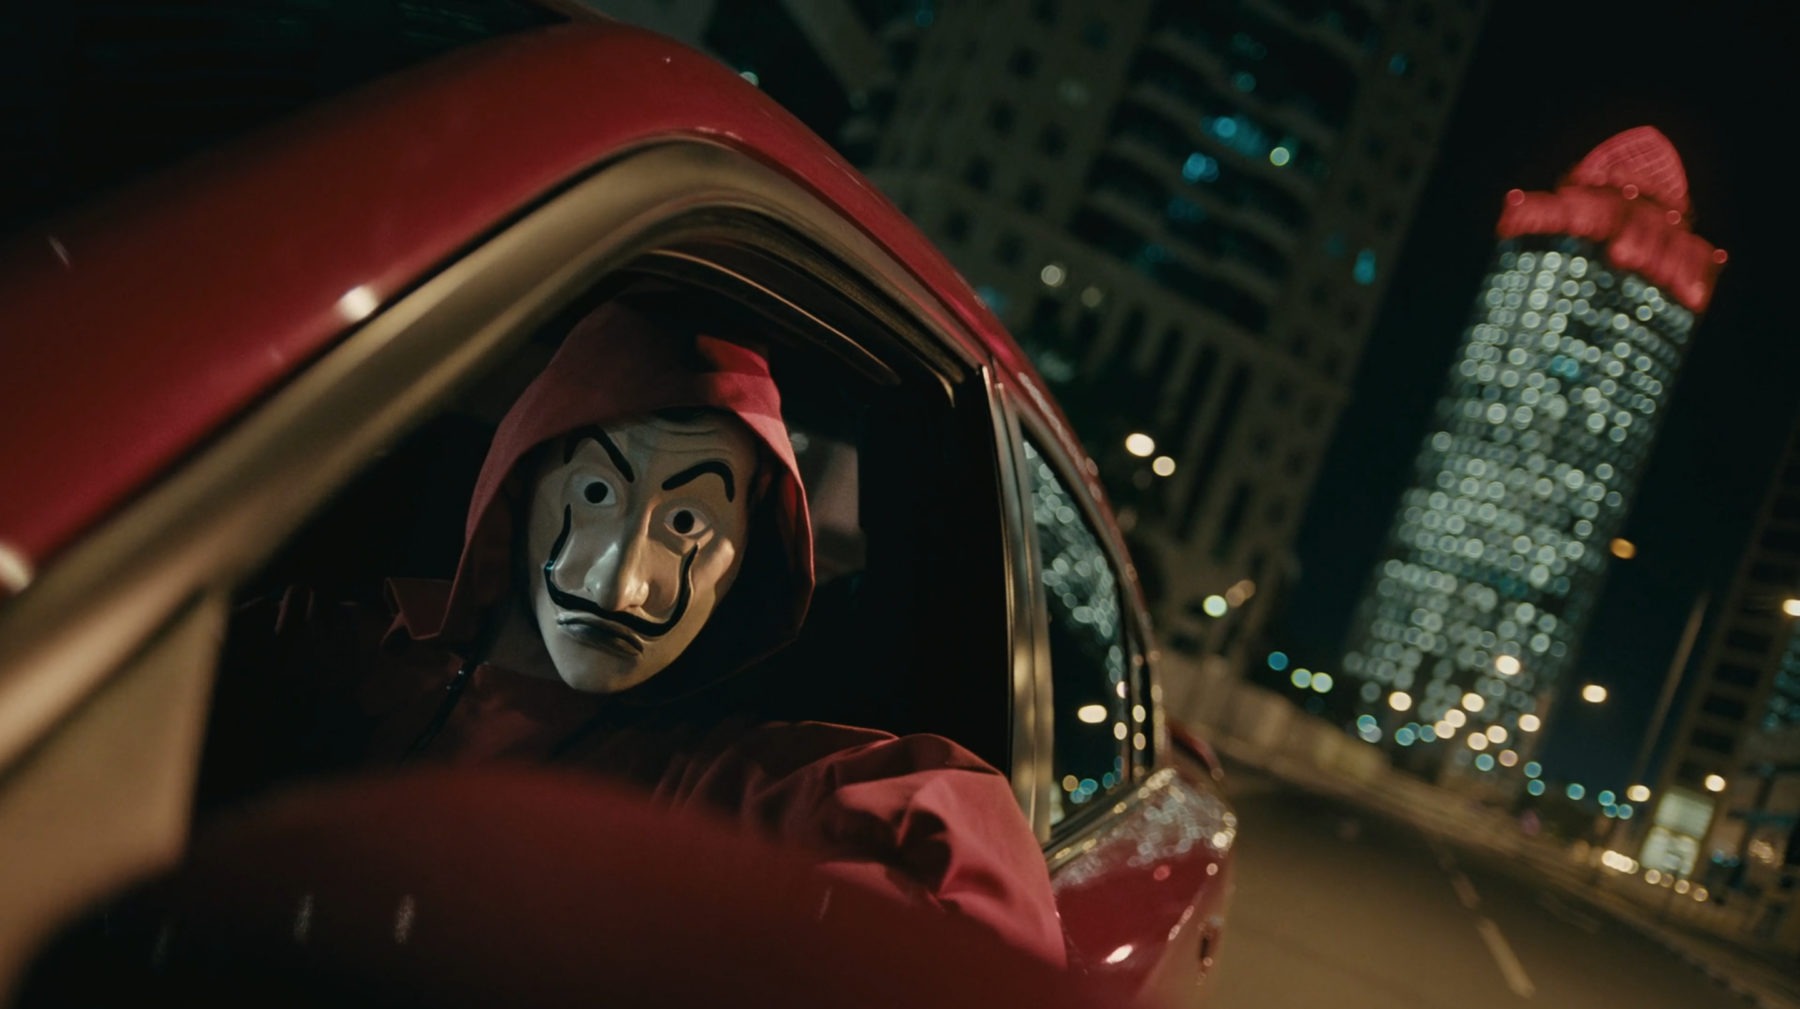 Ooredoo’s recent video commercial based on Netflix’s series Money Heist scripted and directed by Dimitri Yuri, ©Image courtesy of Dimitri Yuri